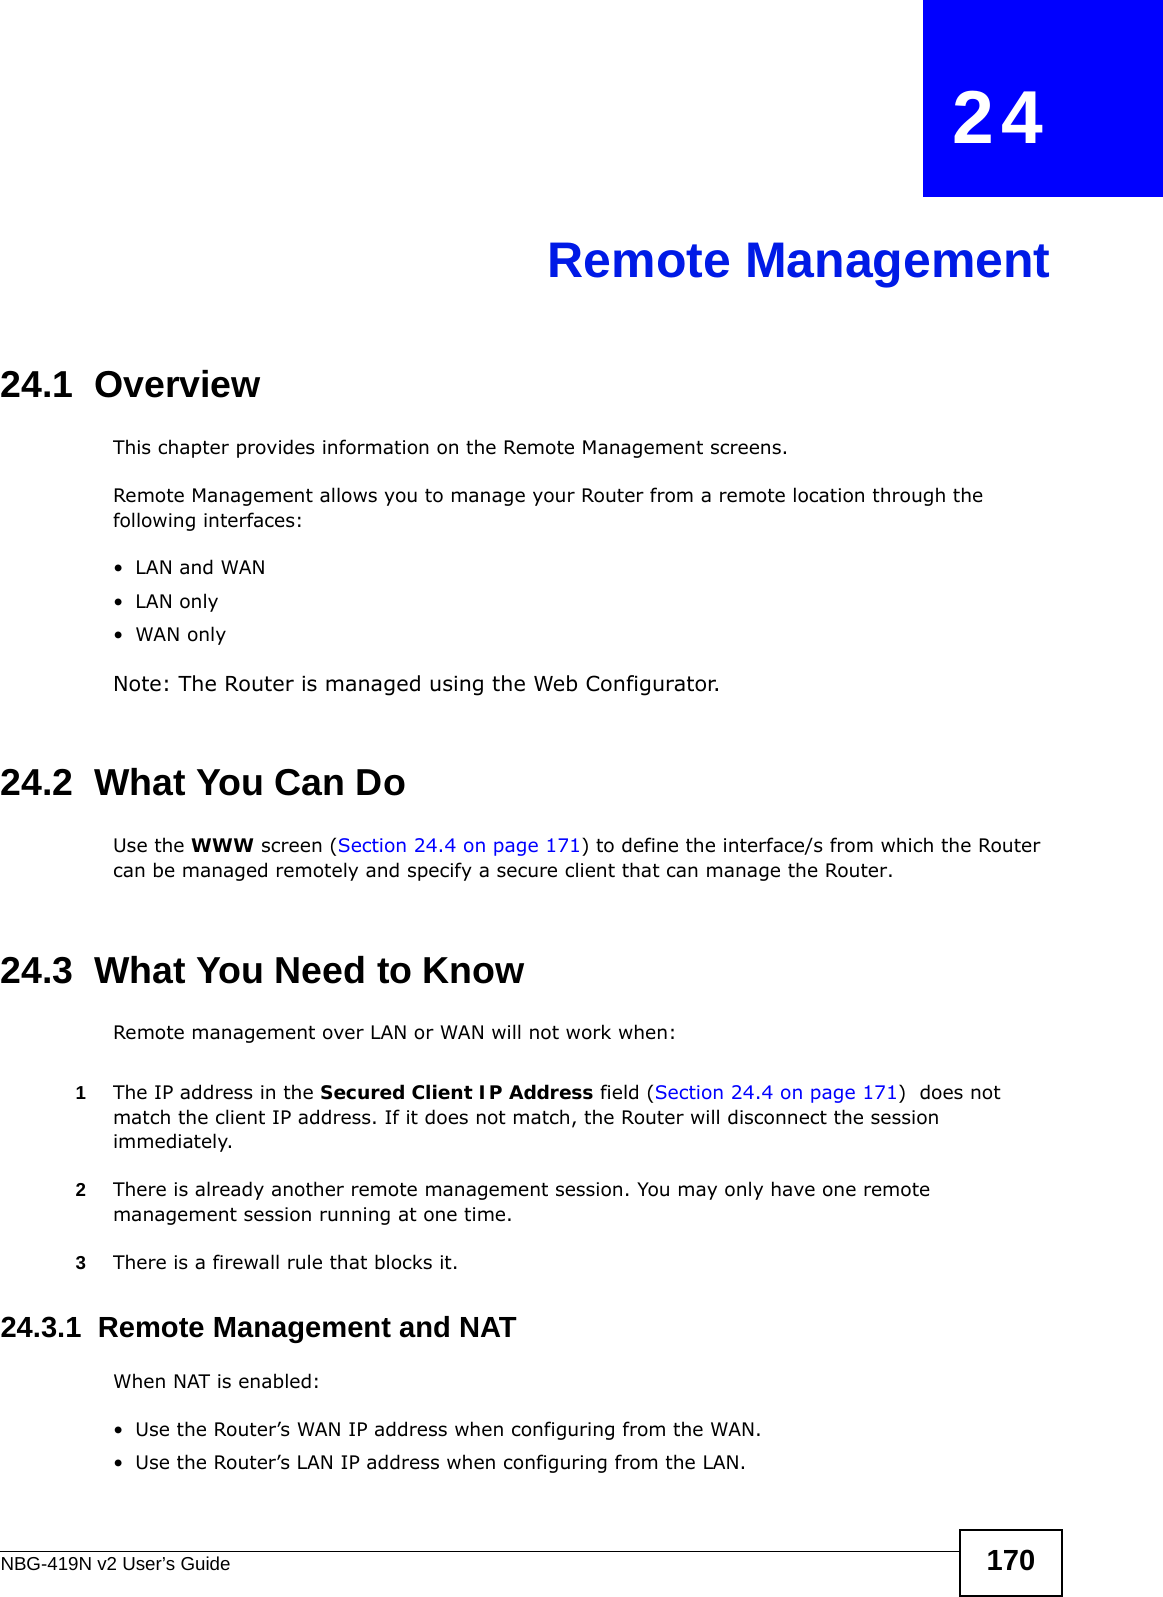 NBG-419N v2 User’s Guide 170CHAPTER   24Remote Management24.1  OverviewThis chapter provides information on the Remote Management screens. Remote Management allows you to manage your Router from a remote location through the following interfaces:•LAN and WAN•LAN only•WAN onlyNote: The Router is managed using the Web Configurator.24.2  What You Can DoUse the WWW screen (Section 24.4 on page 171) to define the interface/s from which the Router can be managed remotely and specify a secure client that can manage the Router.24.3  What You Need to KnowRemote management over LAN or WAN will not work when:1The IP address in the Secured Client IP Address field (Section 24.4 on page 171)  does not match the client IP address. If it does not match, the Router will disconnect the session immediately.2There is already another remote management session. You may only have one remote management session running at one time.3There is a firewall rule that blocks it.24.3.1  Remote Management and NATWhen NAT is enabled:• Use the Router’s WAN IP address when configuring from the WAN. • Use the Router’s LAN IP address when configuring from the LAN.